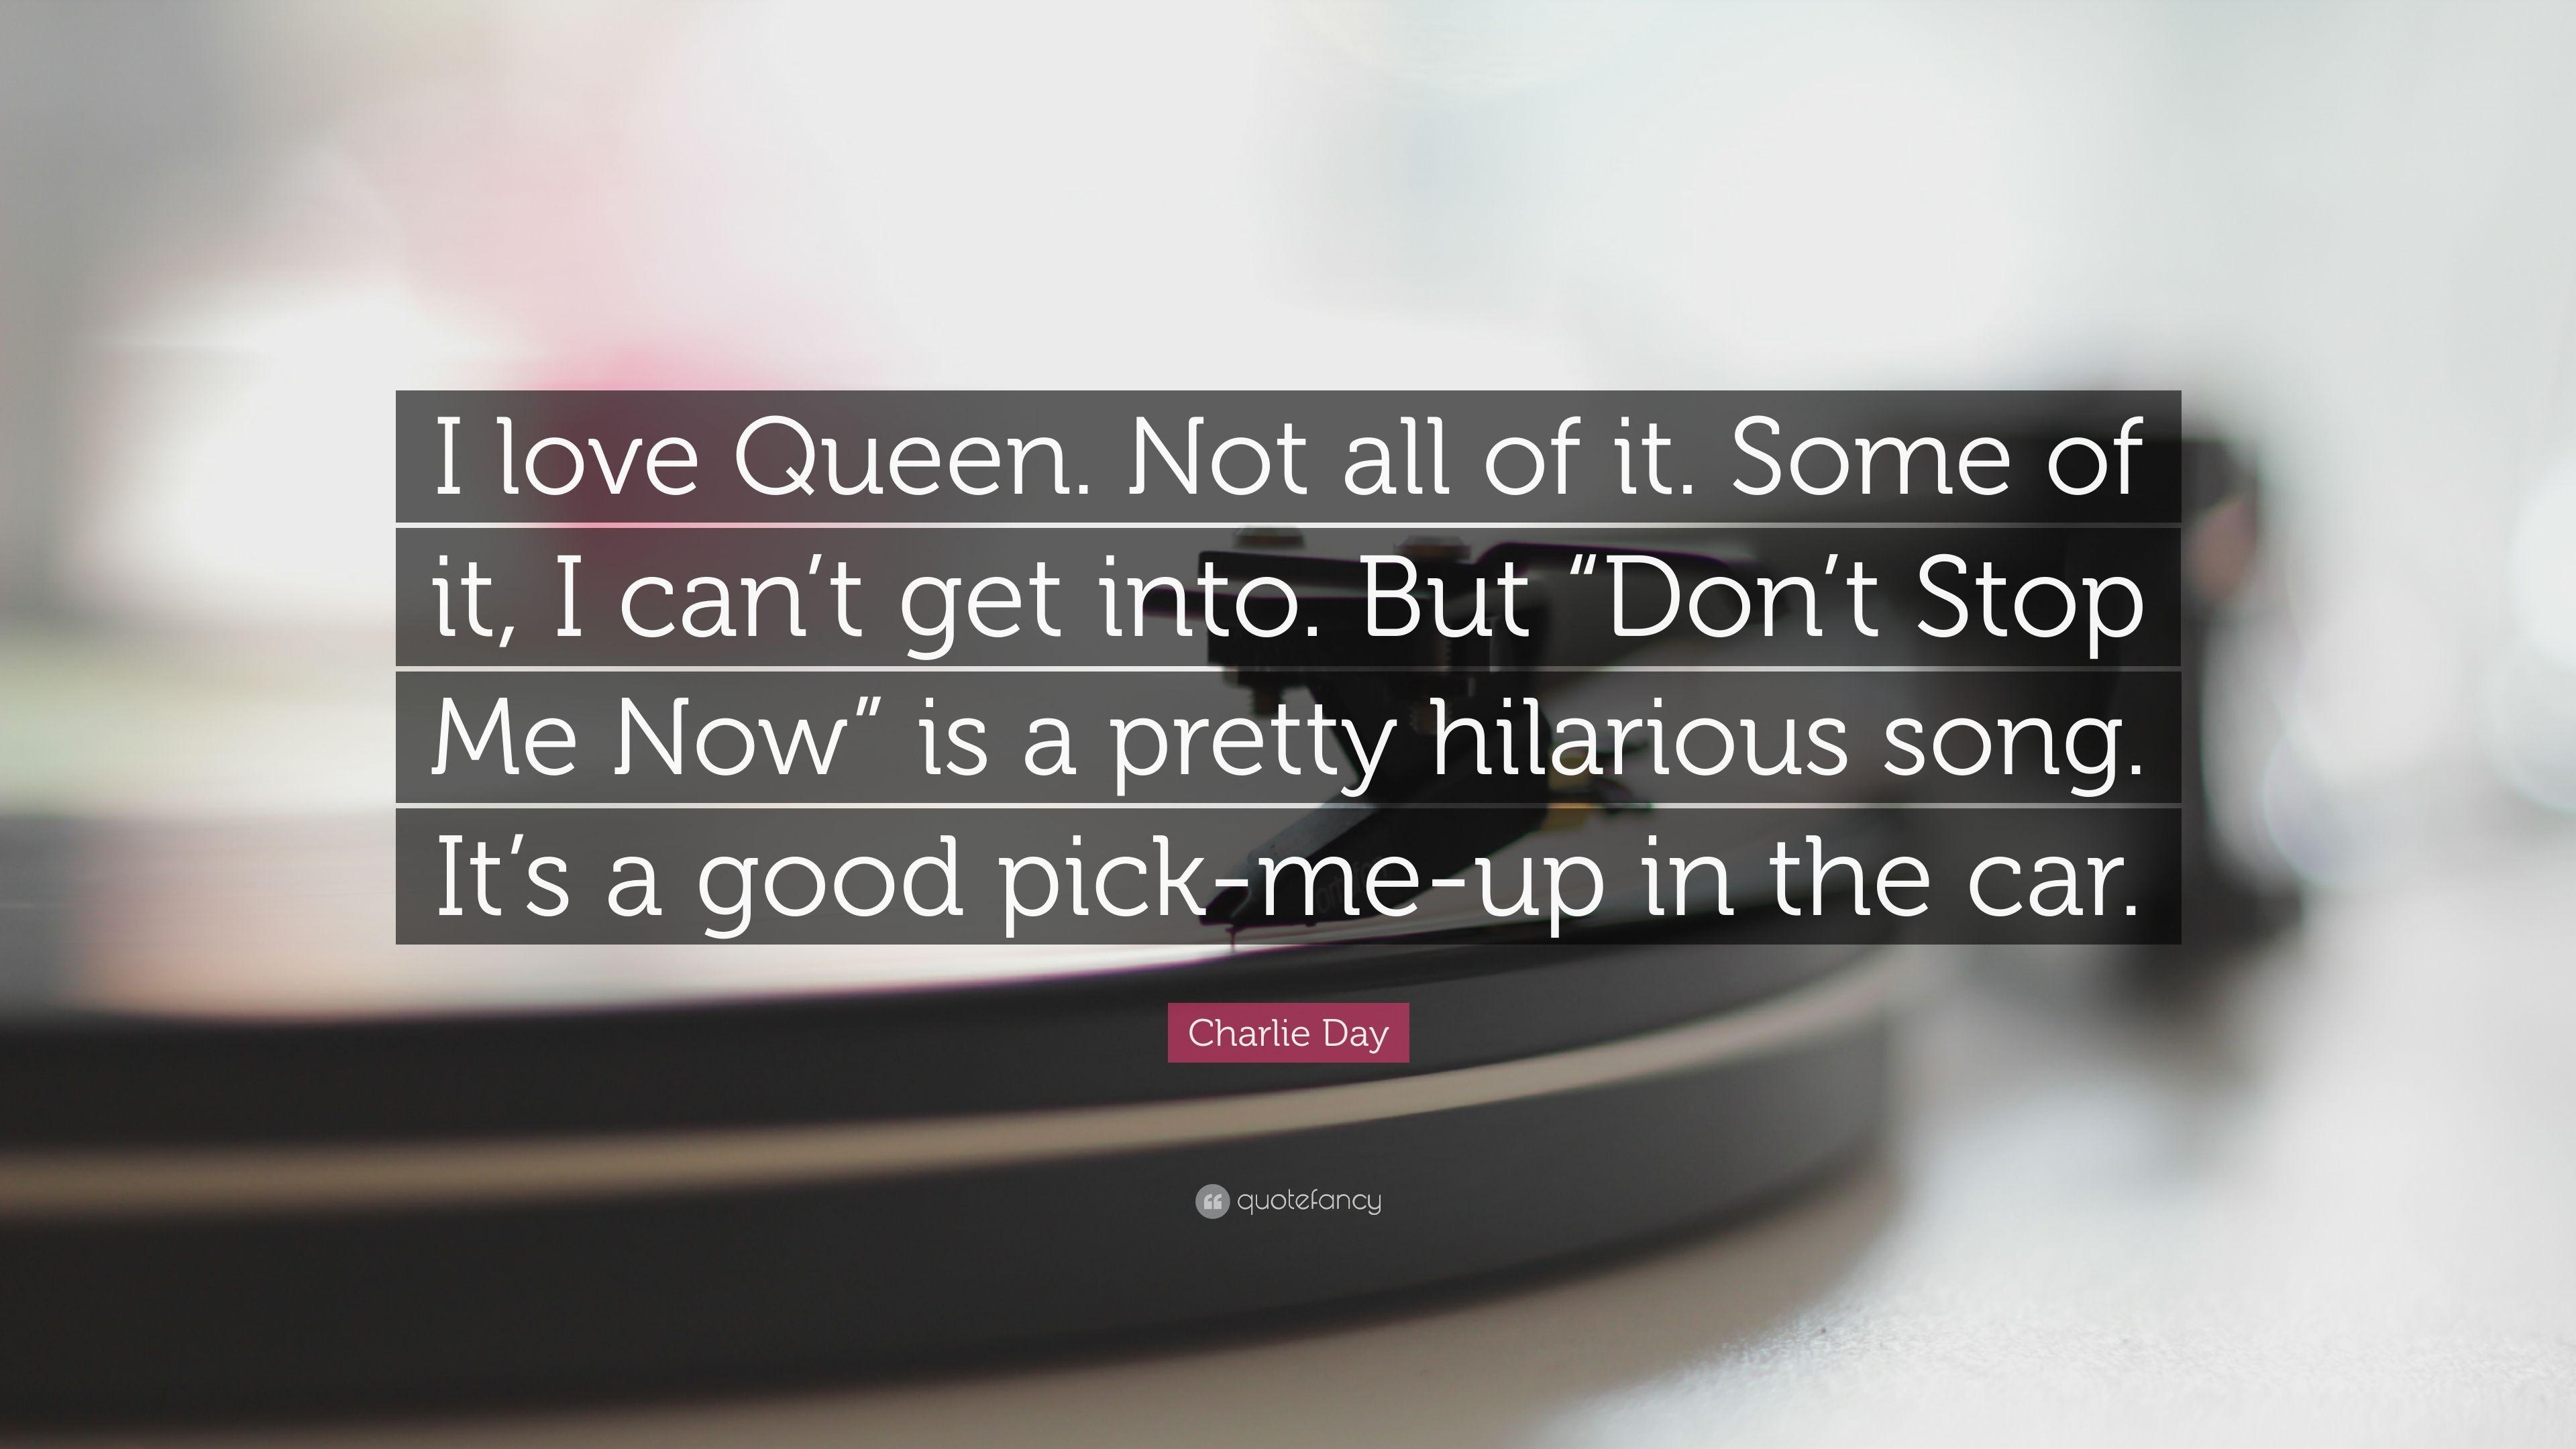 Charlie Day Quote: "I love Queen. 